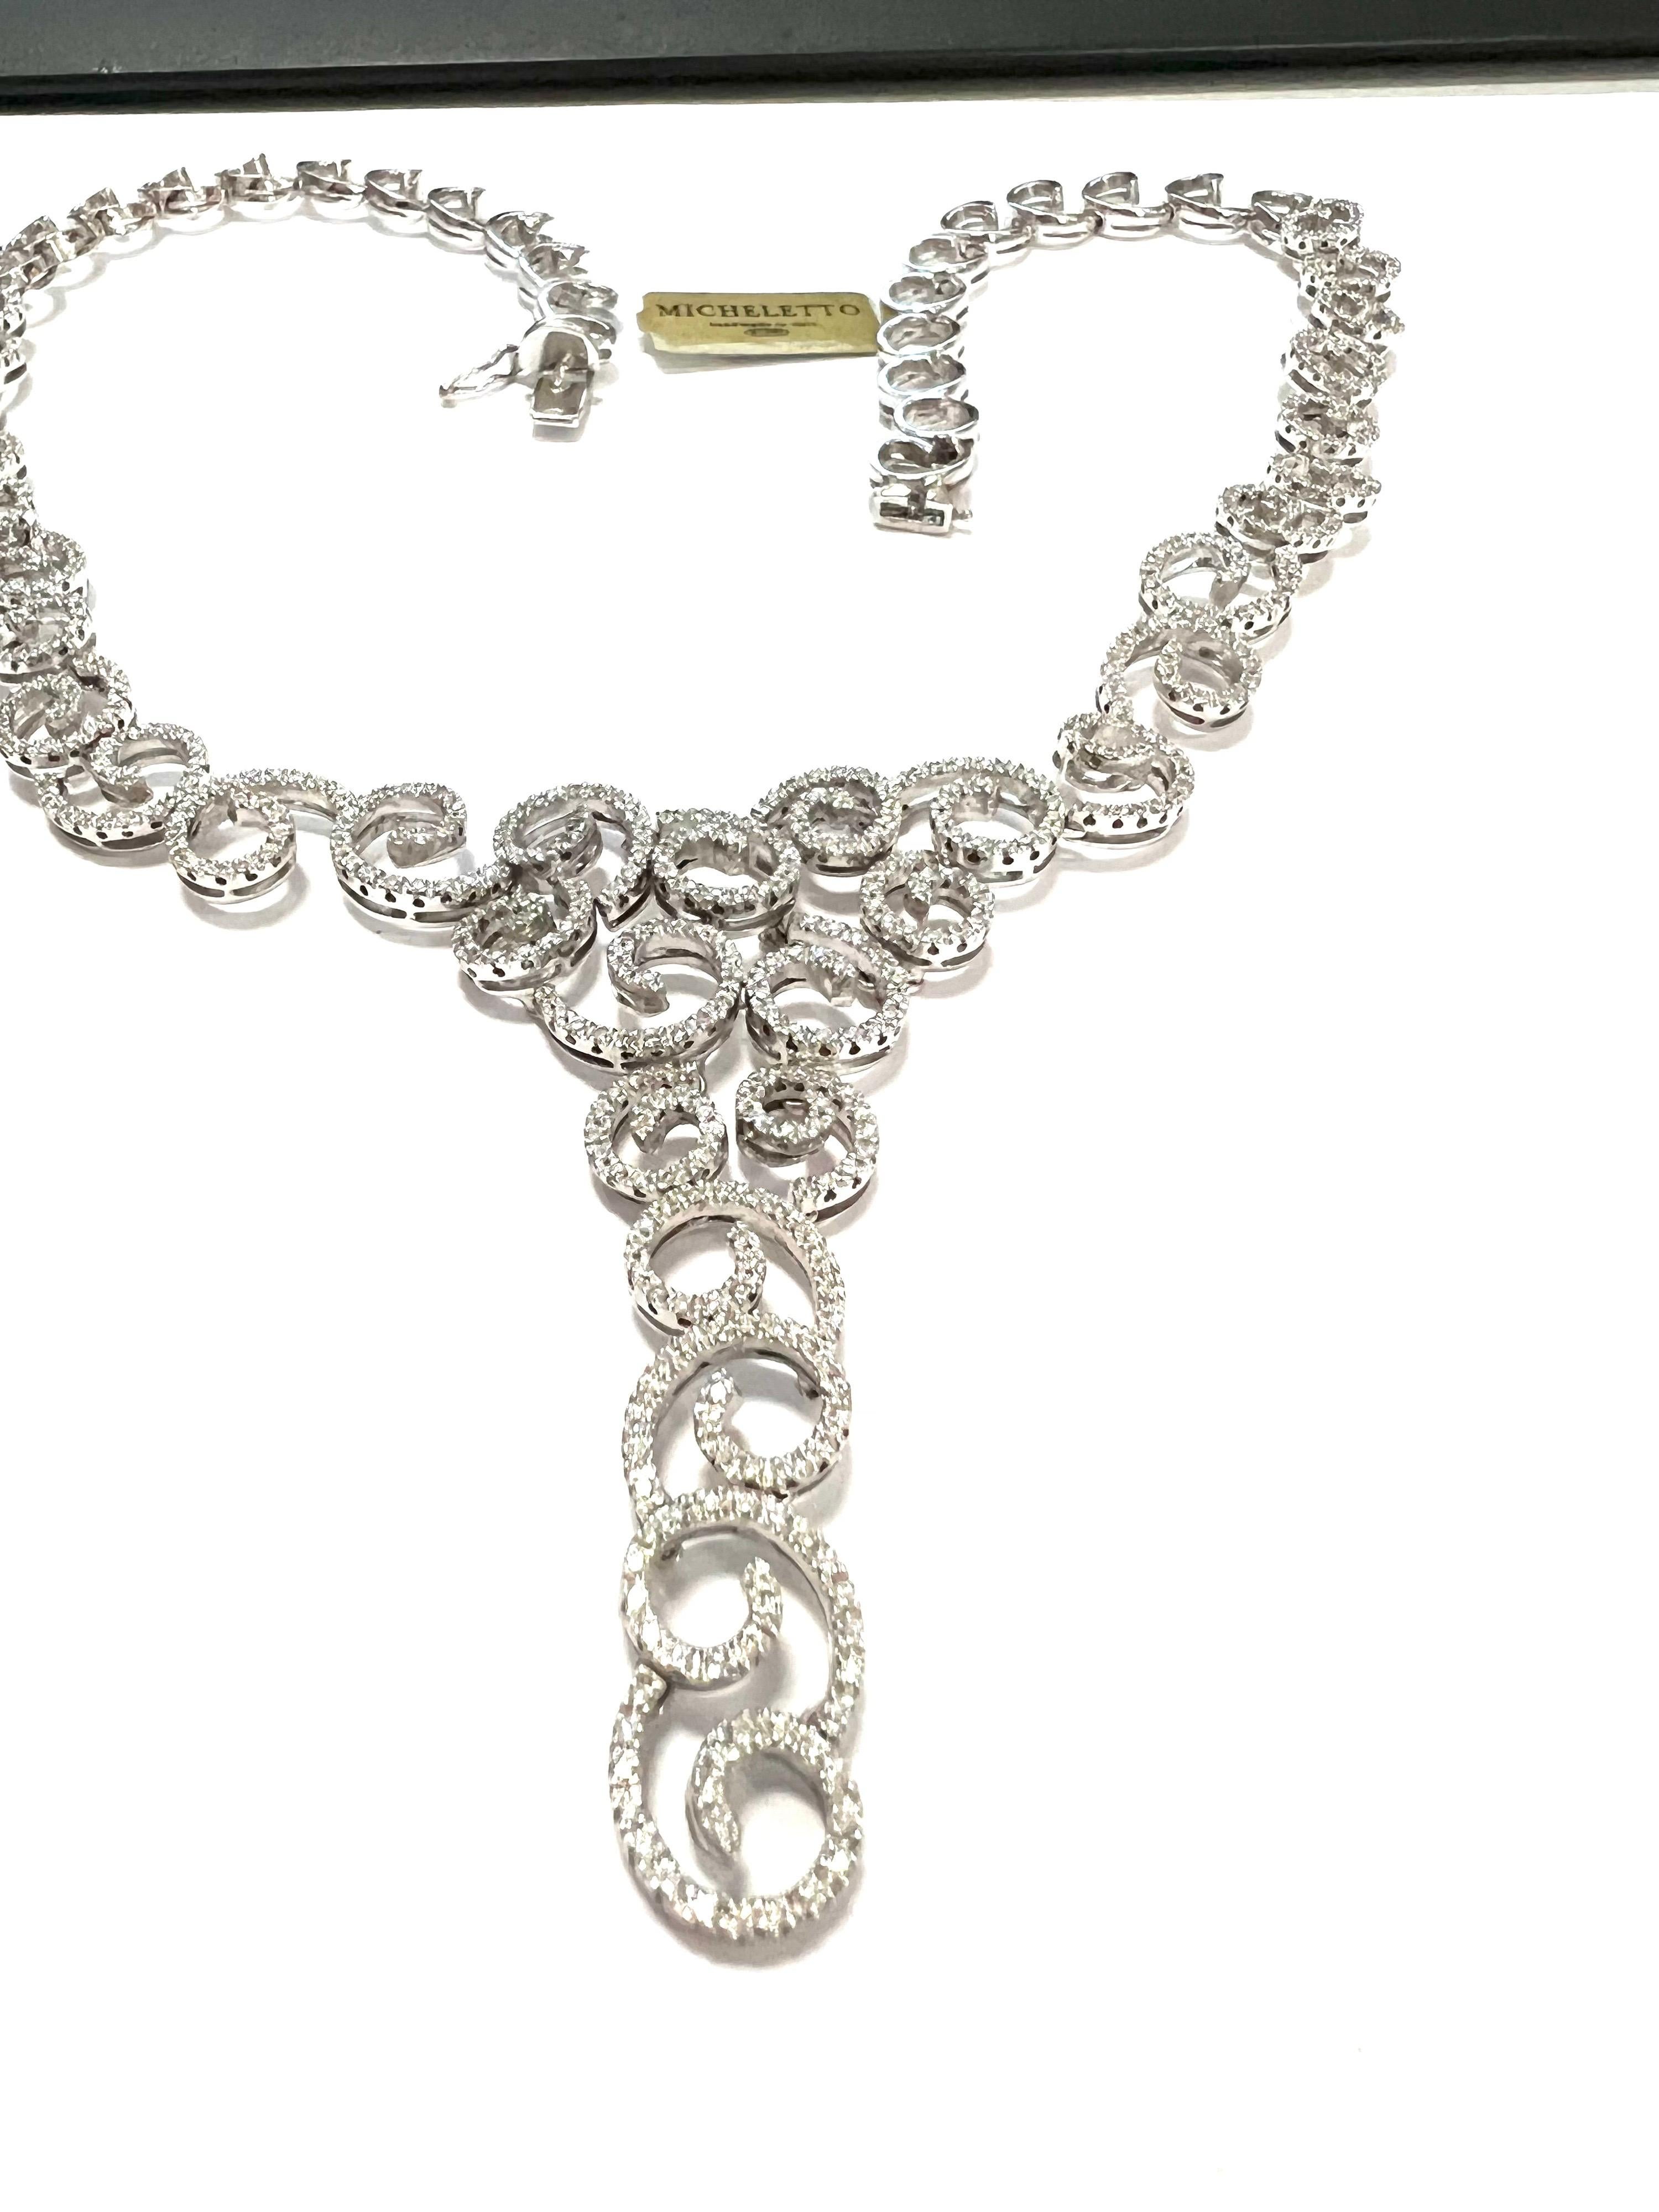 Wonderful 18k White Gold Necklace and White Diamonds from the 